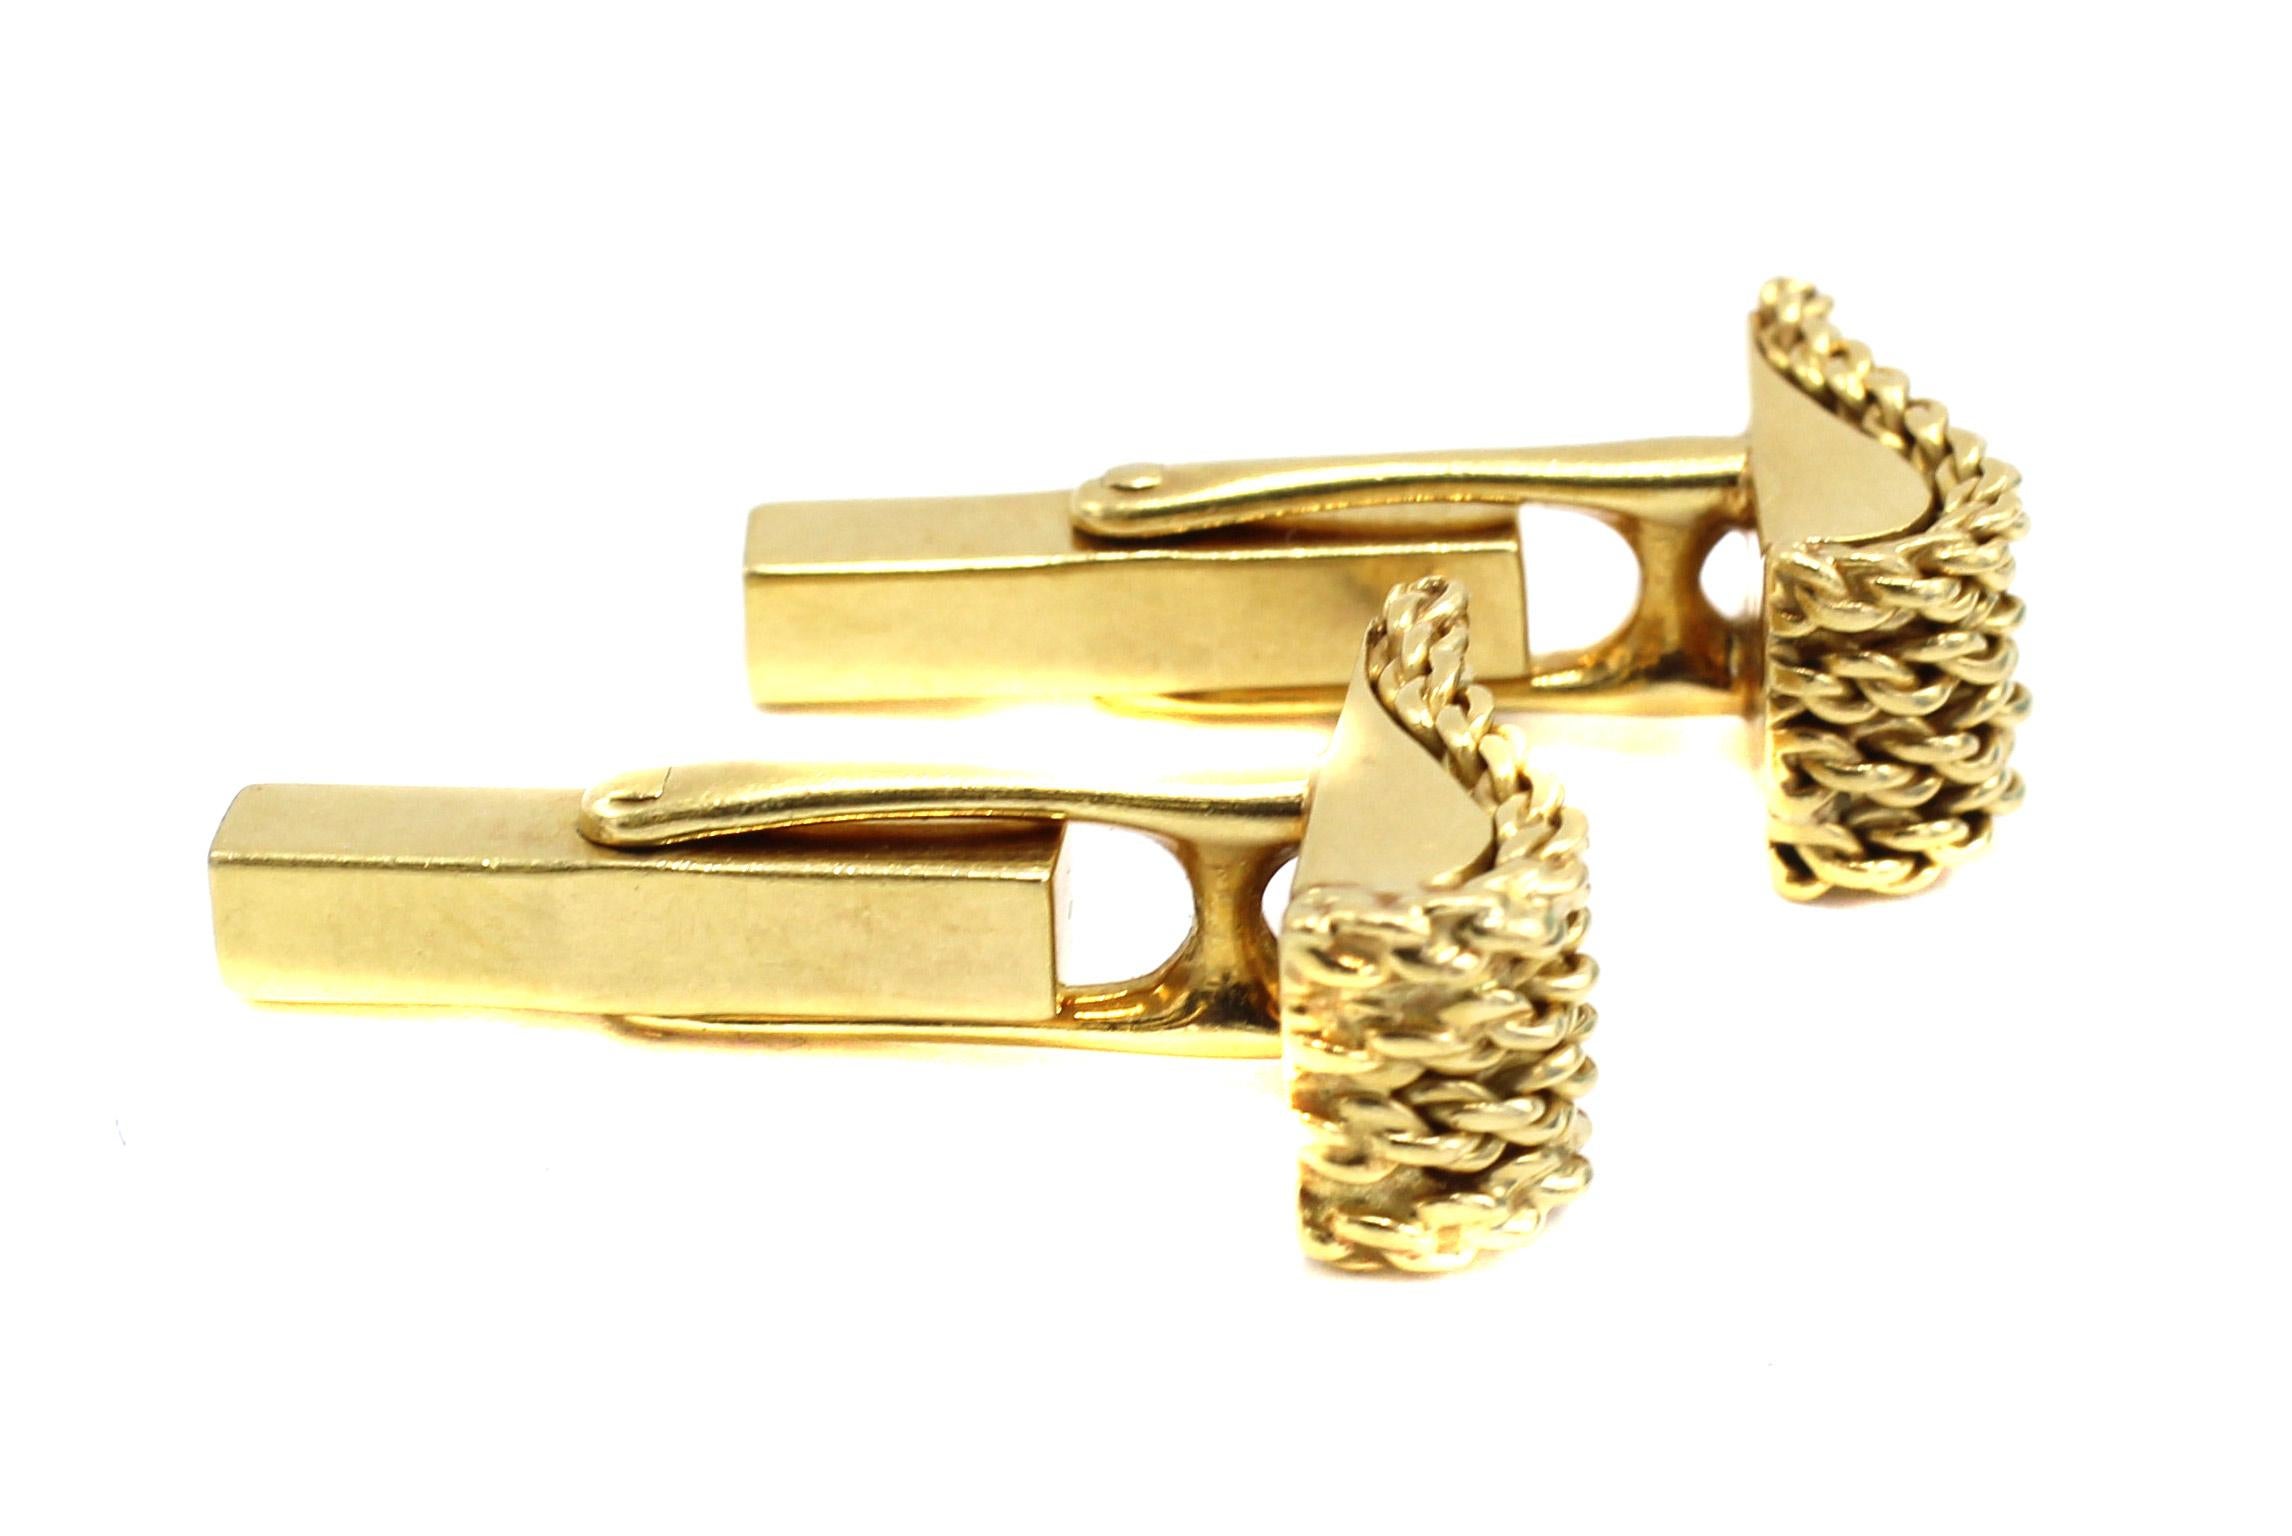 1980s cuff-links by Tiffany & Company designed in the shape of a wave with bars of finely braided gold worked on the top. Secured by a gold swivel-bar on the back, easy to fit into any shirt, masterfully hand-crafted in 18 karat yellow gold. Signed